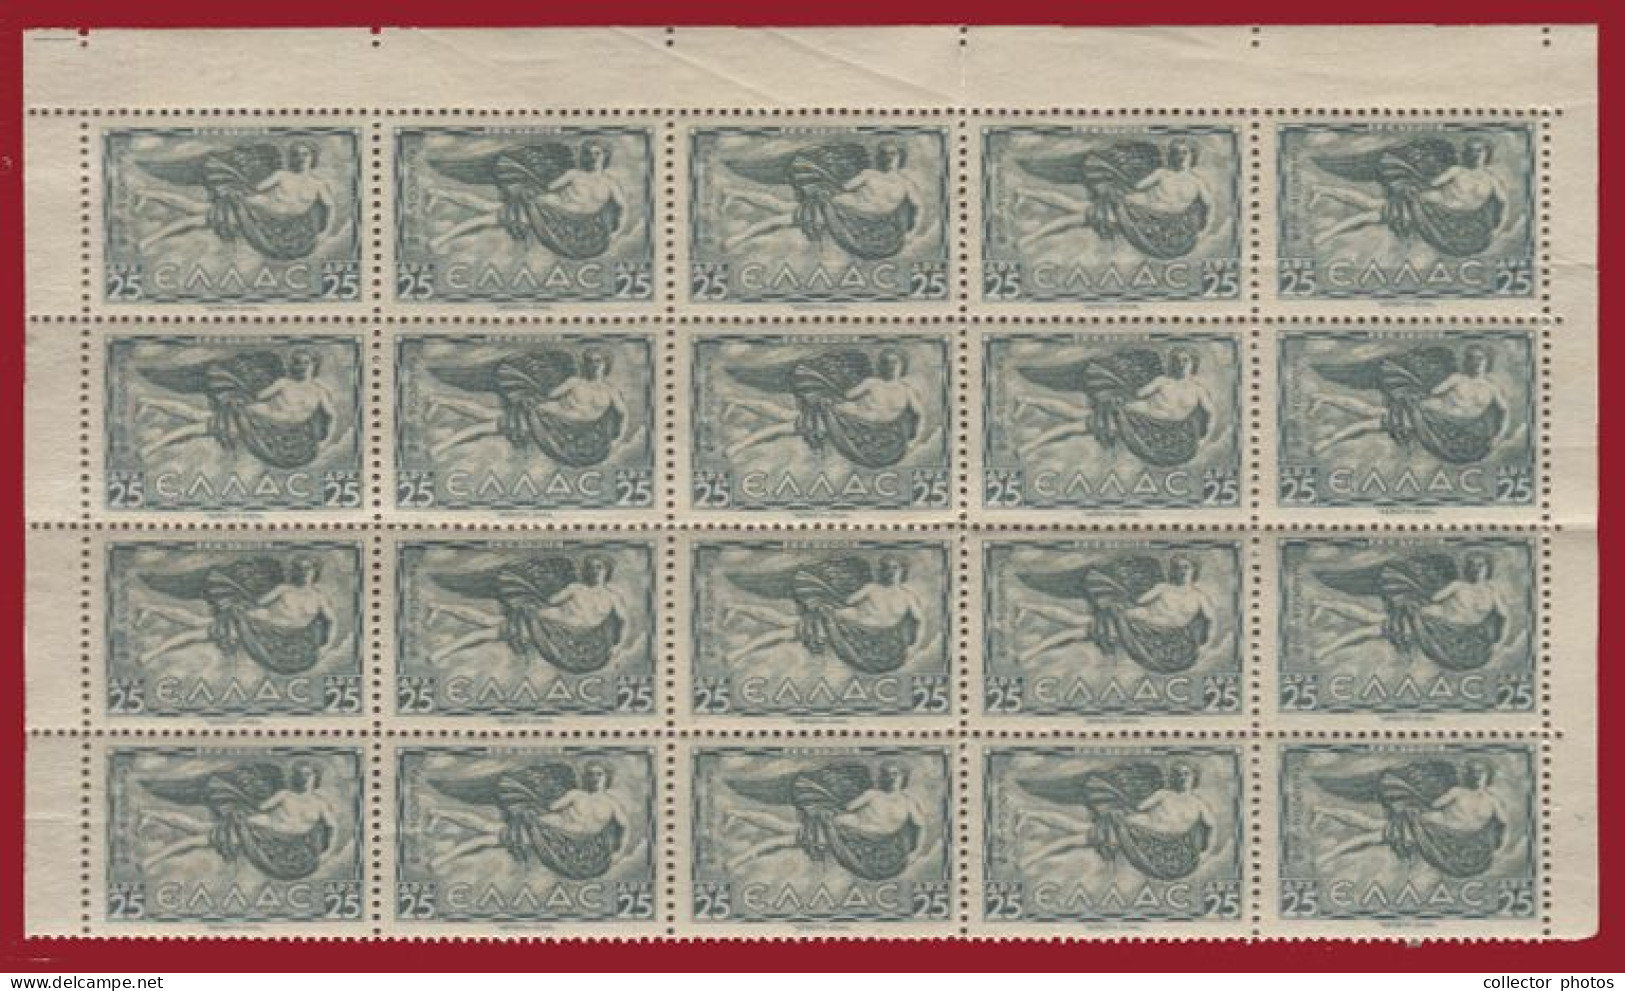 Greece 1943 [German Occupation]. 20 Complette Series Stamps AERIDES (AΕΡΗΔΕΣ) ΜΝΗ**  [de095] - Unused Stamps